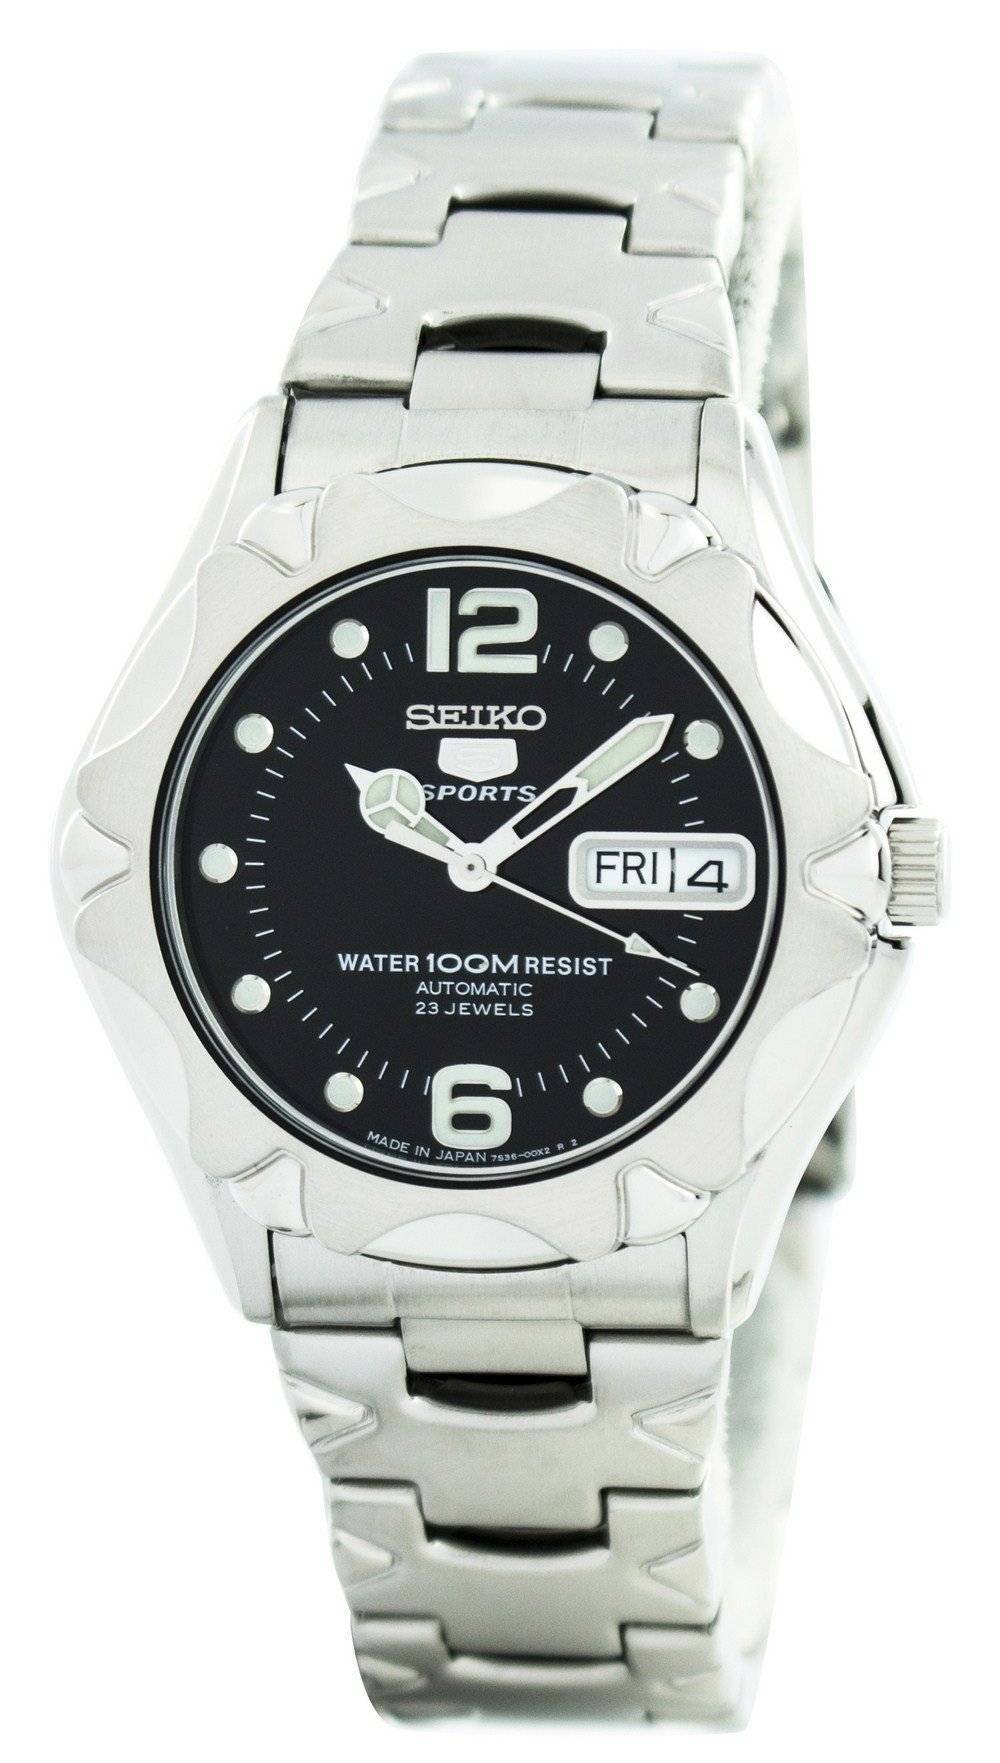 Total 55+ imagen seiko 23 jewels automatic price